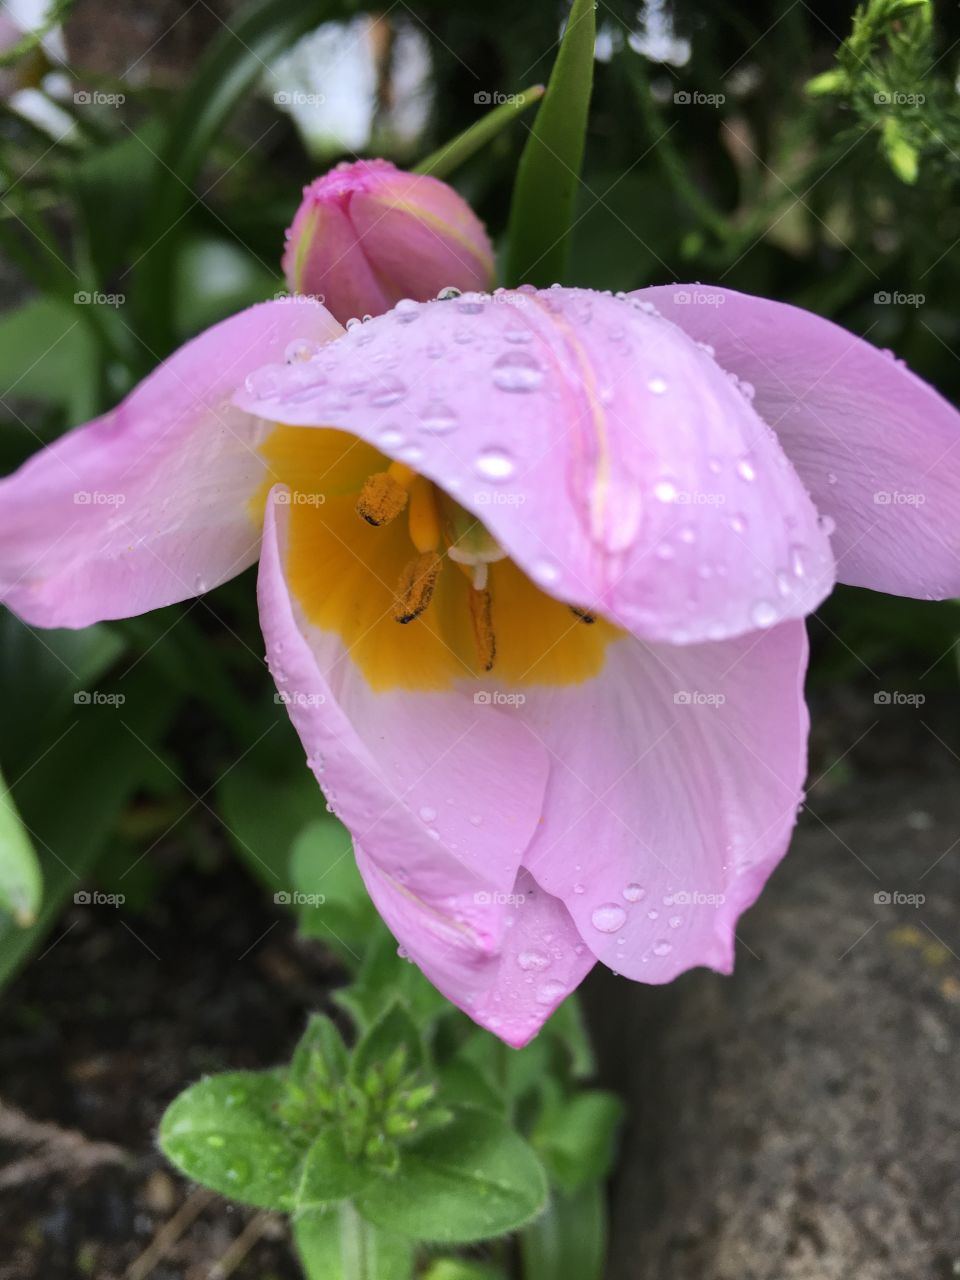 Drooping flower in the rain